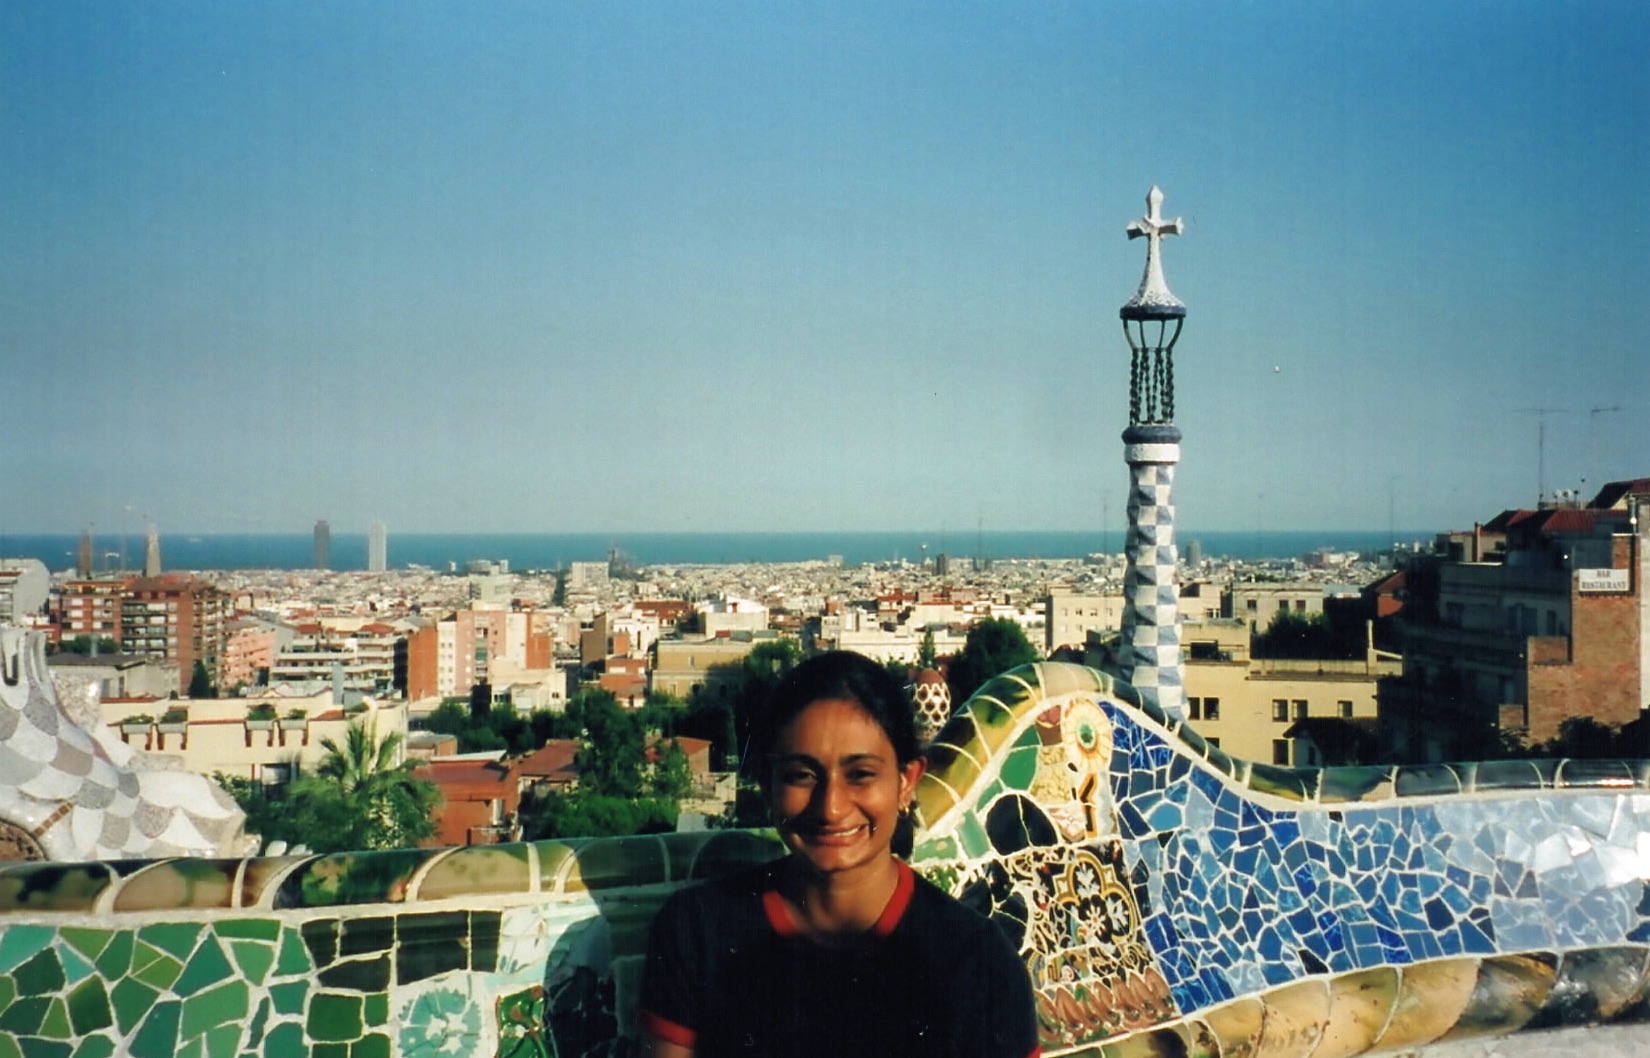   Me being extremely cheerful at the&nbsp;  Parc Guell  &nbsp;in Barcelona (one of my favourite European cities  !)  